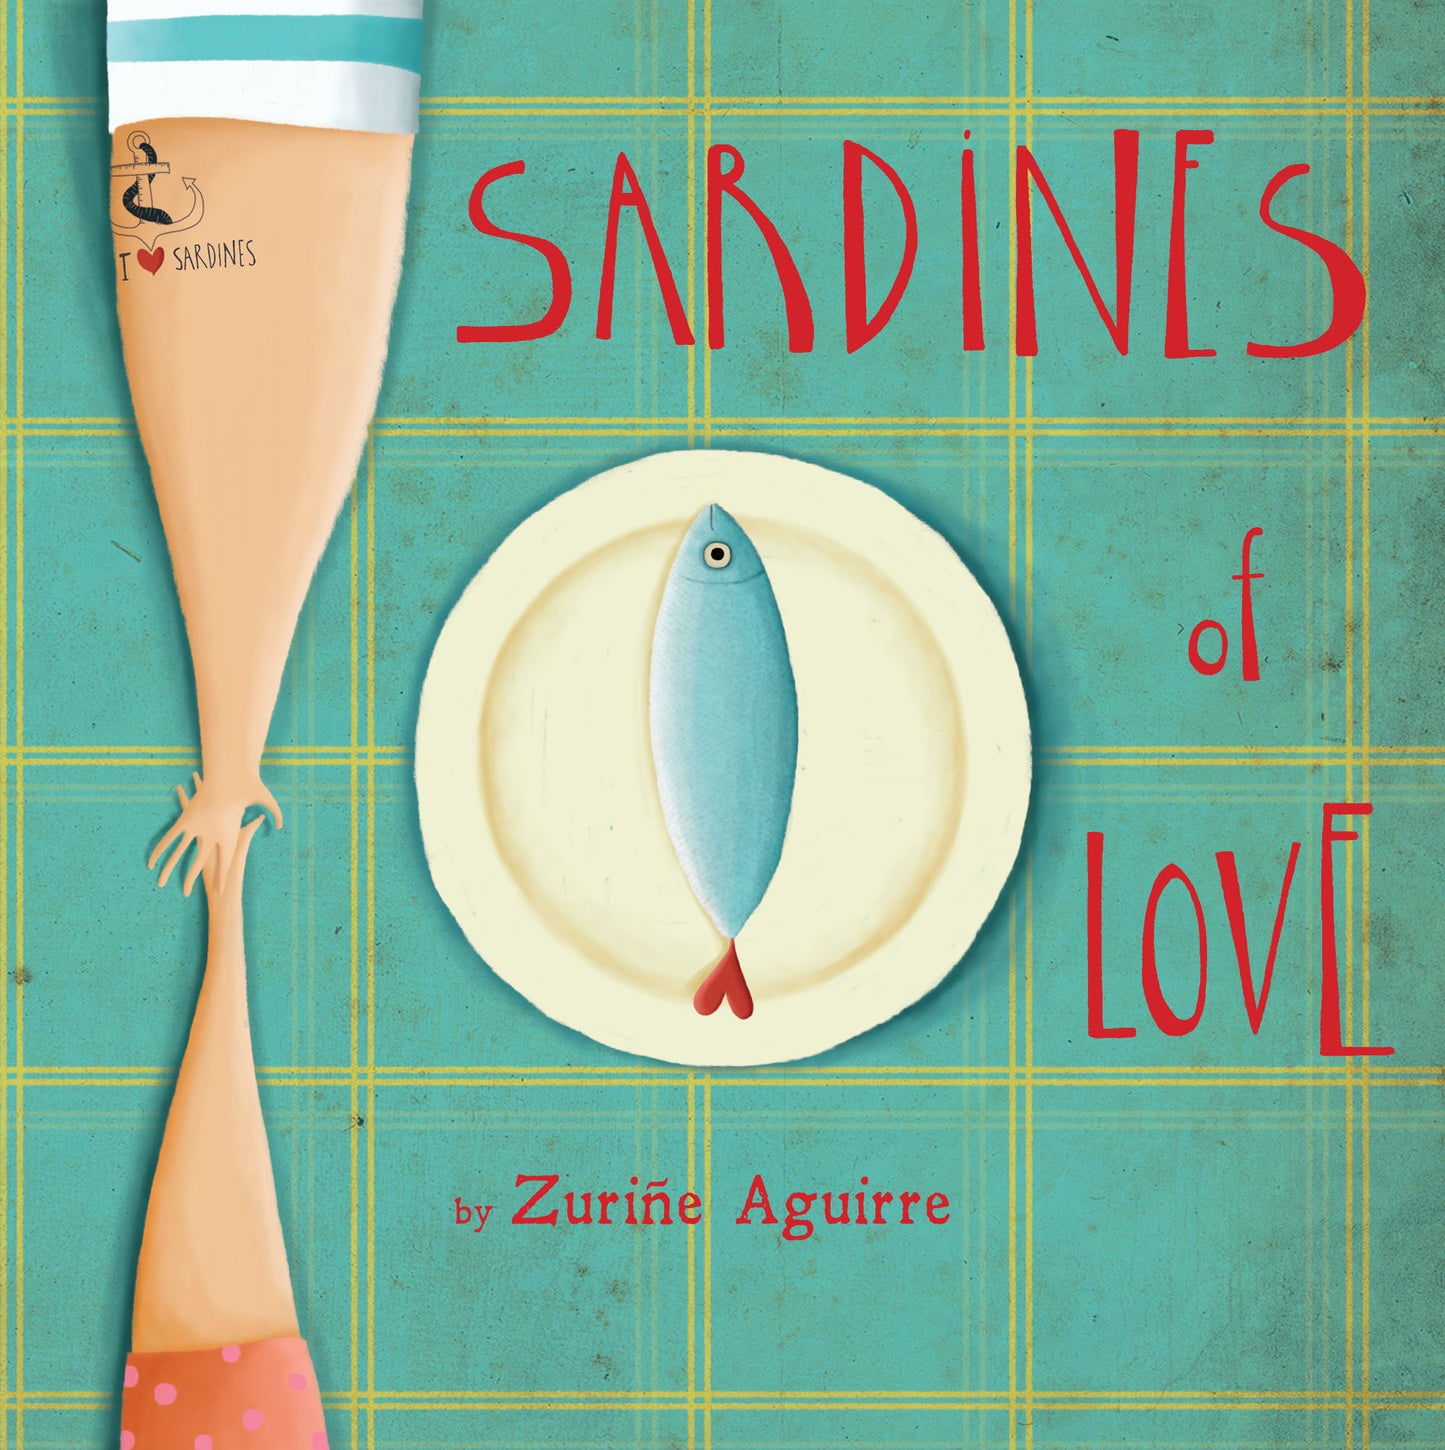 Sardines of Love (Softcover Edition)